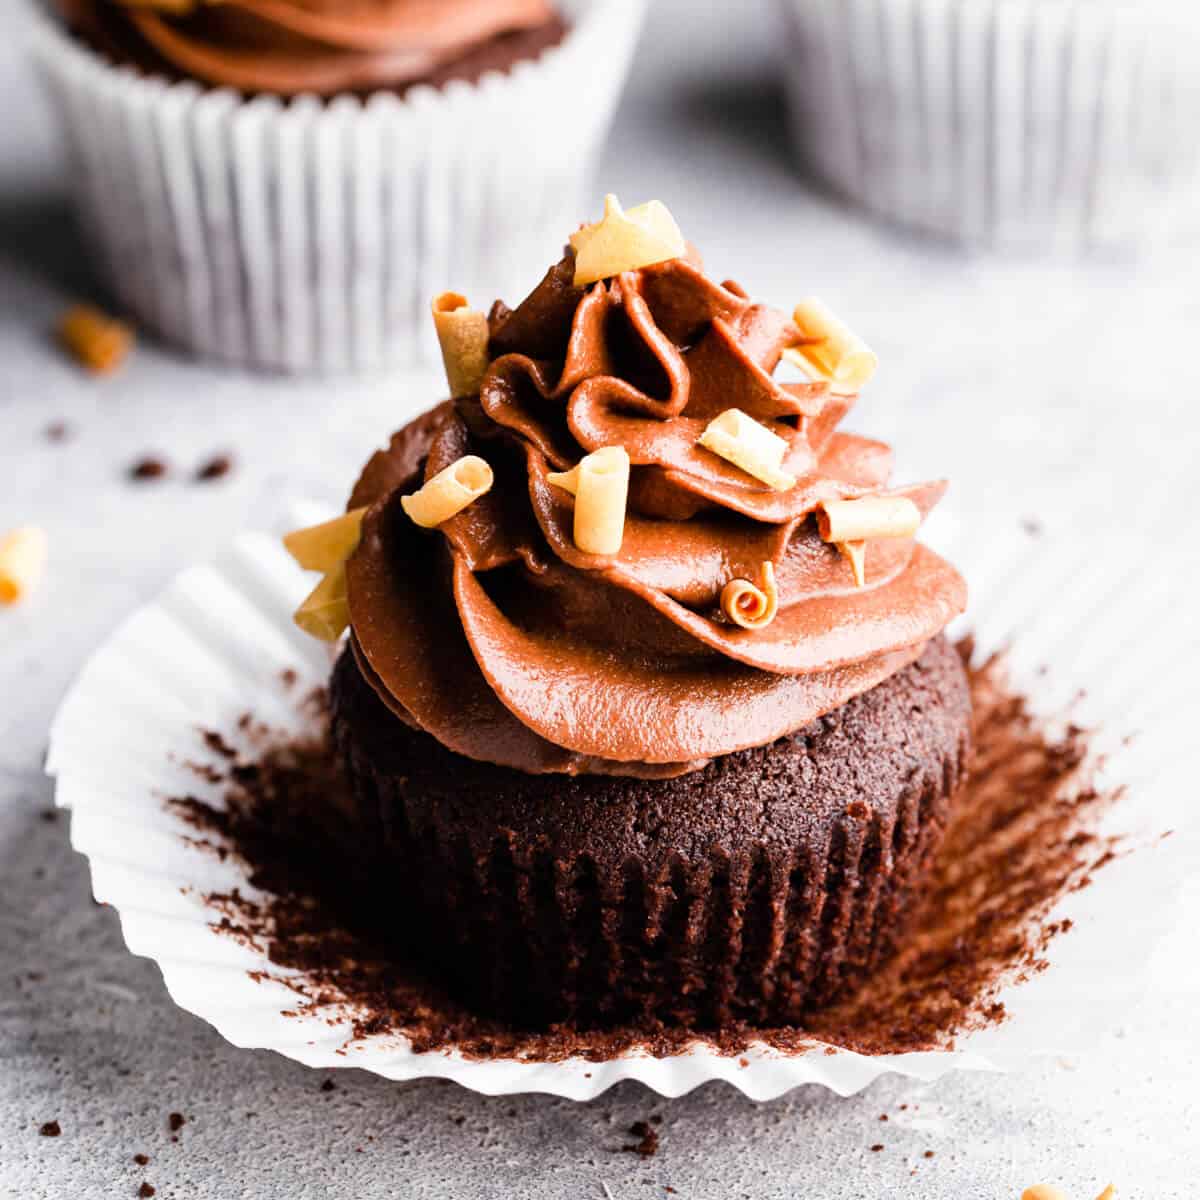 Chocolate Cupcake Recipe from Scratch - The Busy Baker